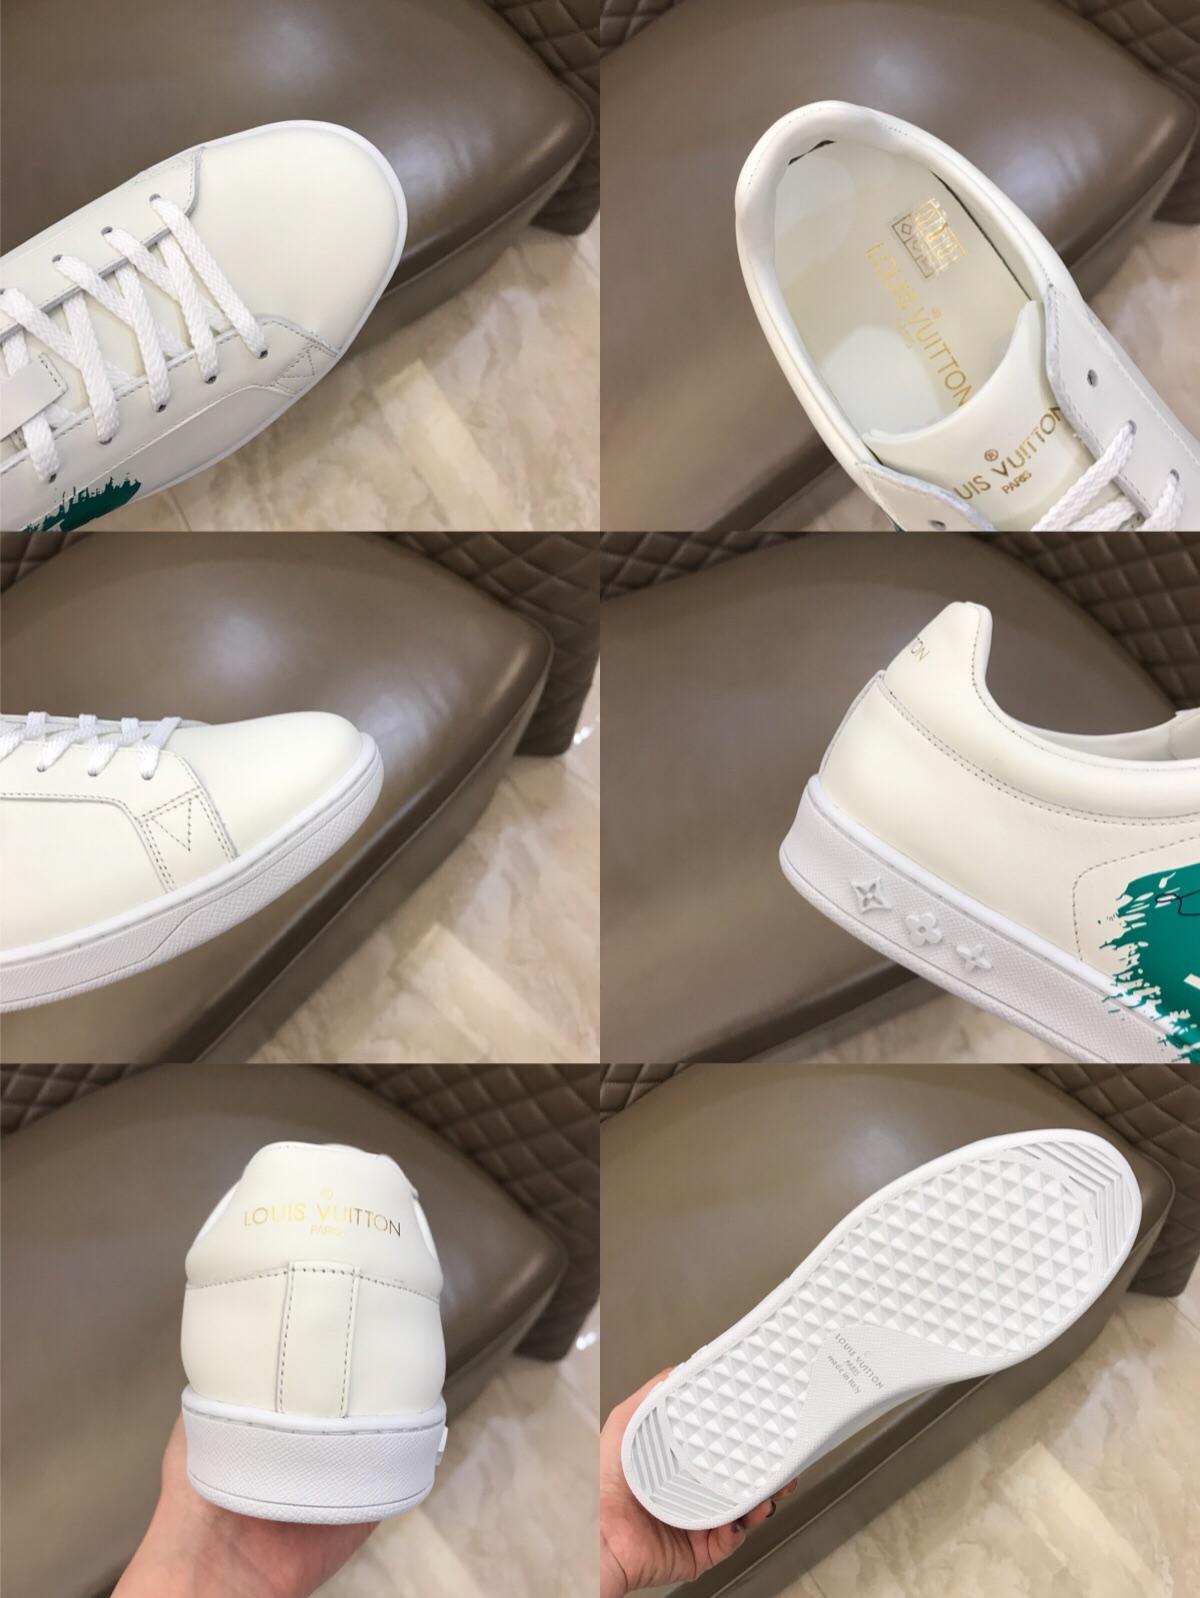 lv Fashion Sneakers White and green LV swash print with white sole MS02870